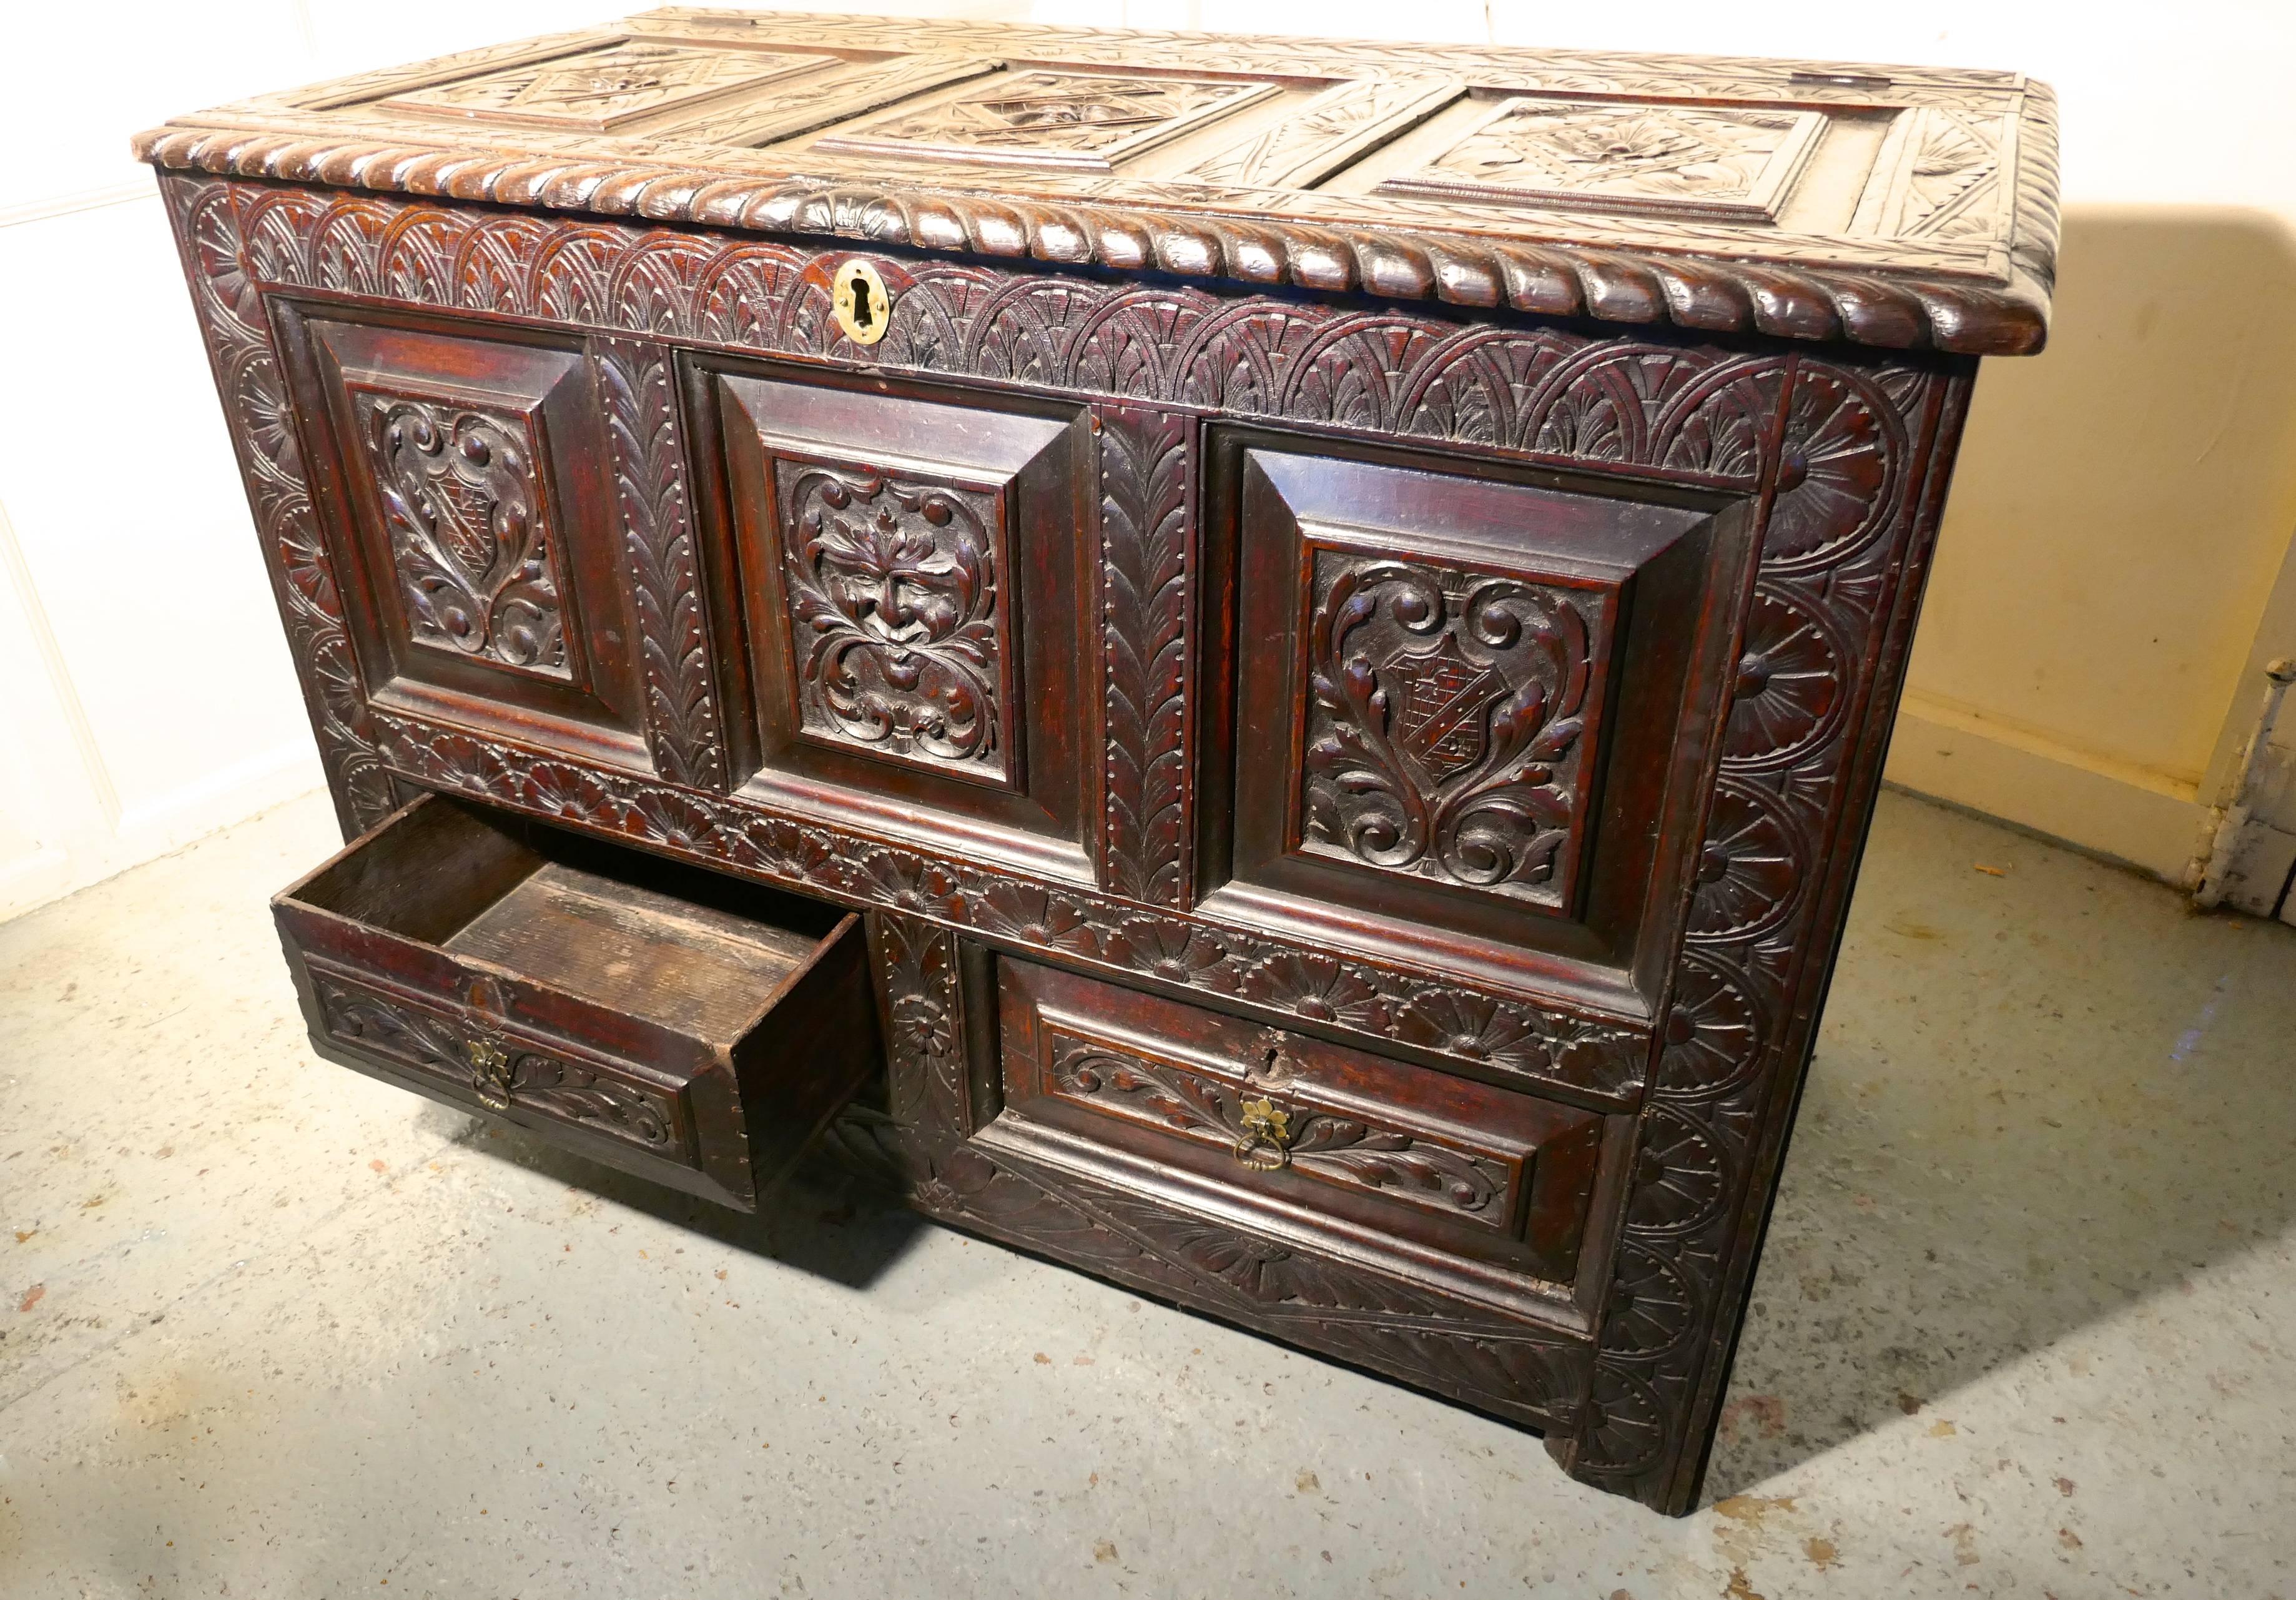 Large carved oak mule chest, green man marriage chest

This is a profusely carved marriage chest, the coffer has many detailed carved panels. On the front we have two family crests on either side of the green man’s face, and on the top we have